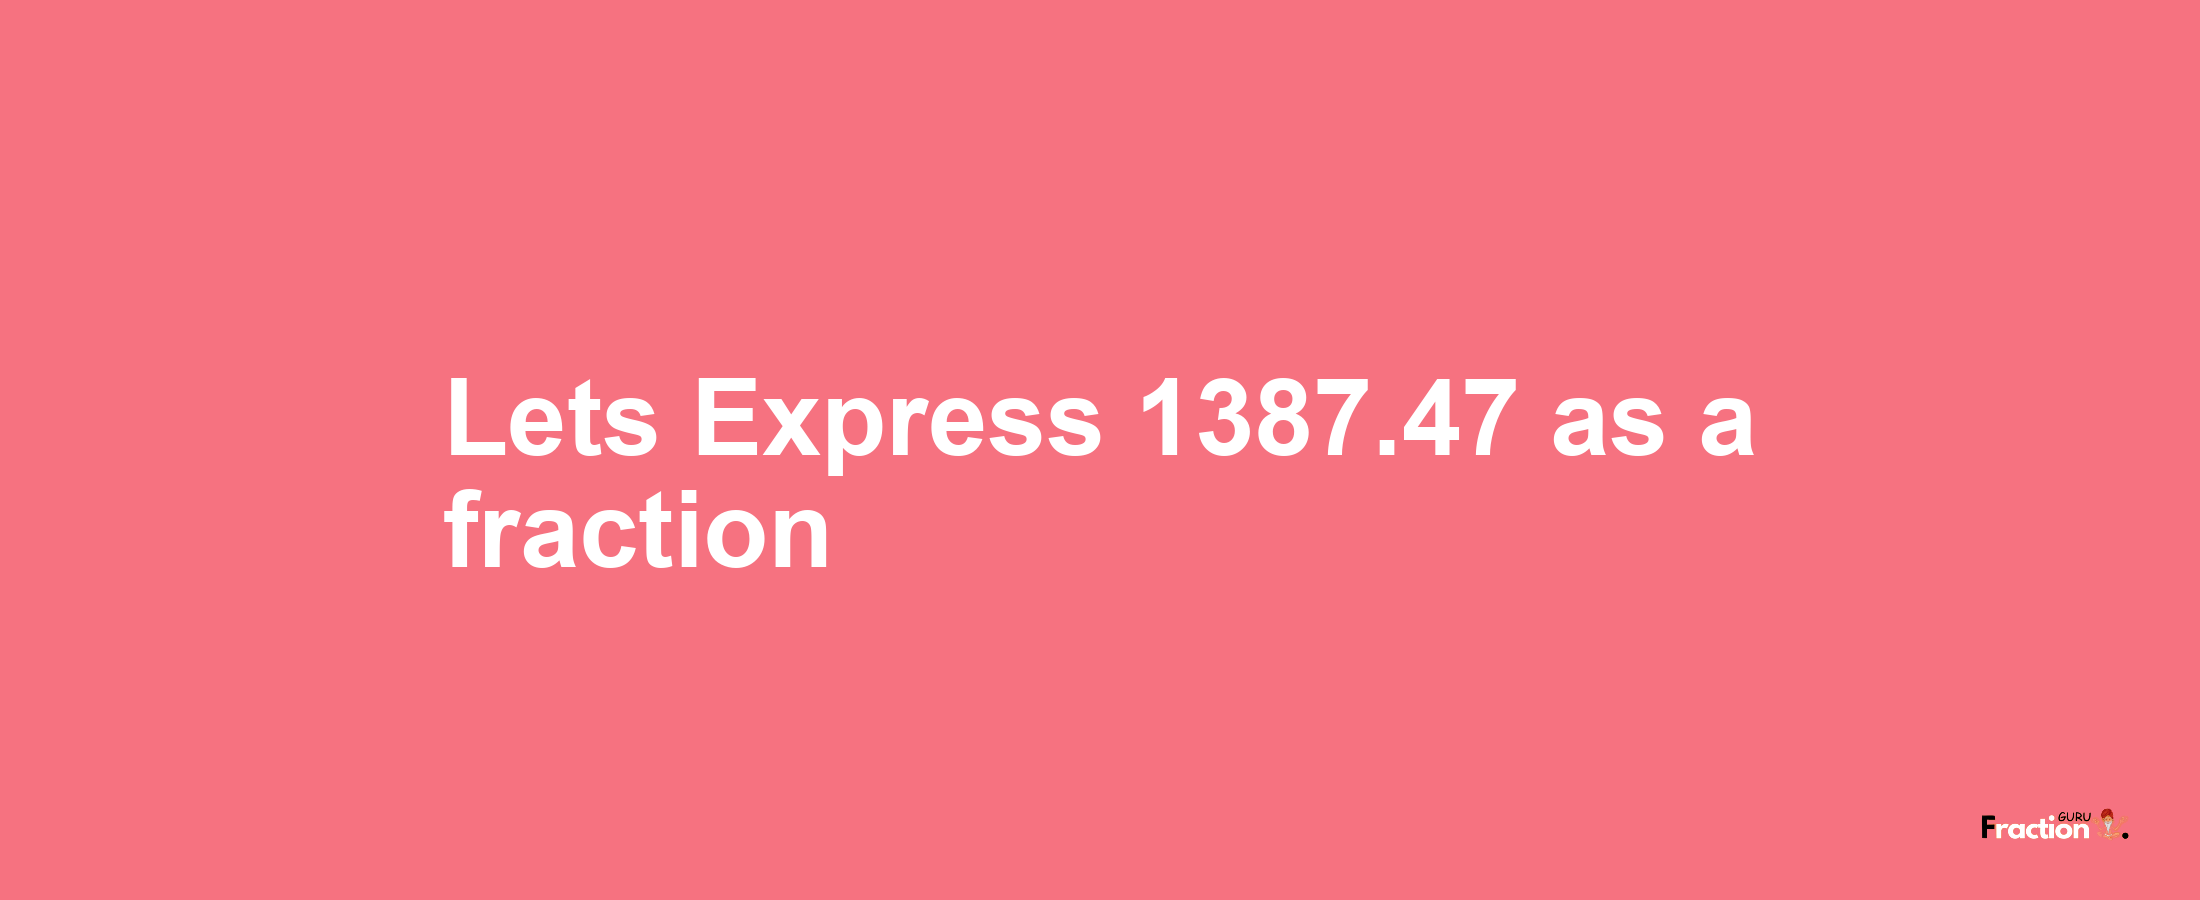 Lets Express 1387.47 as afraction